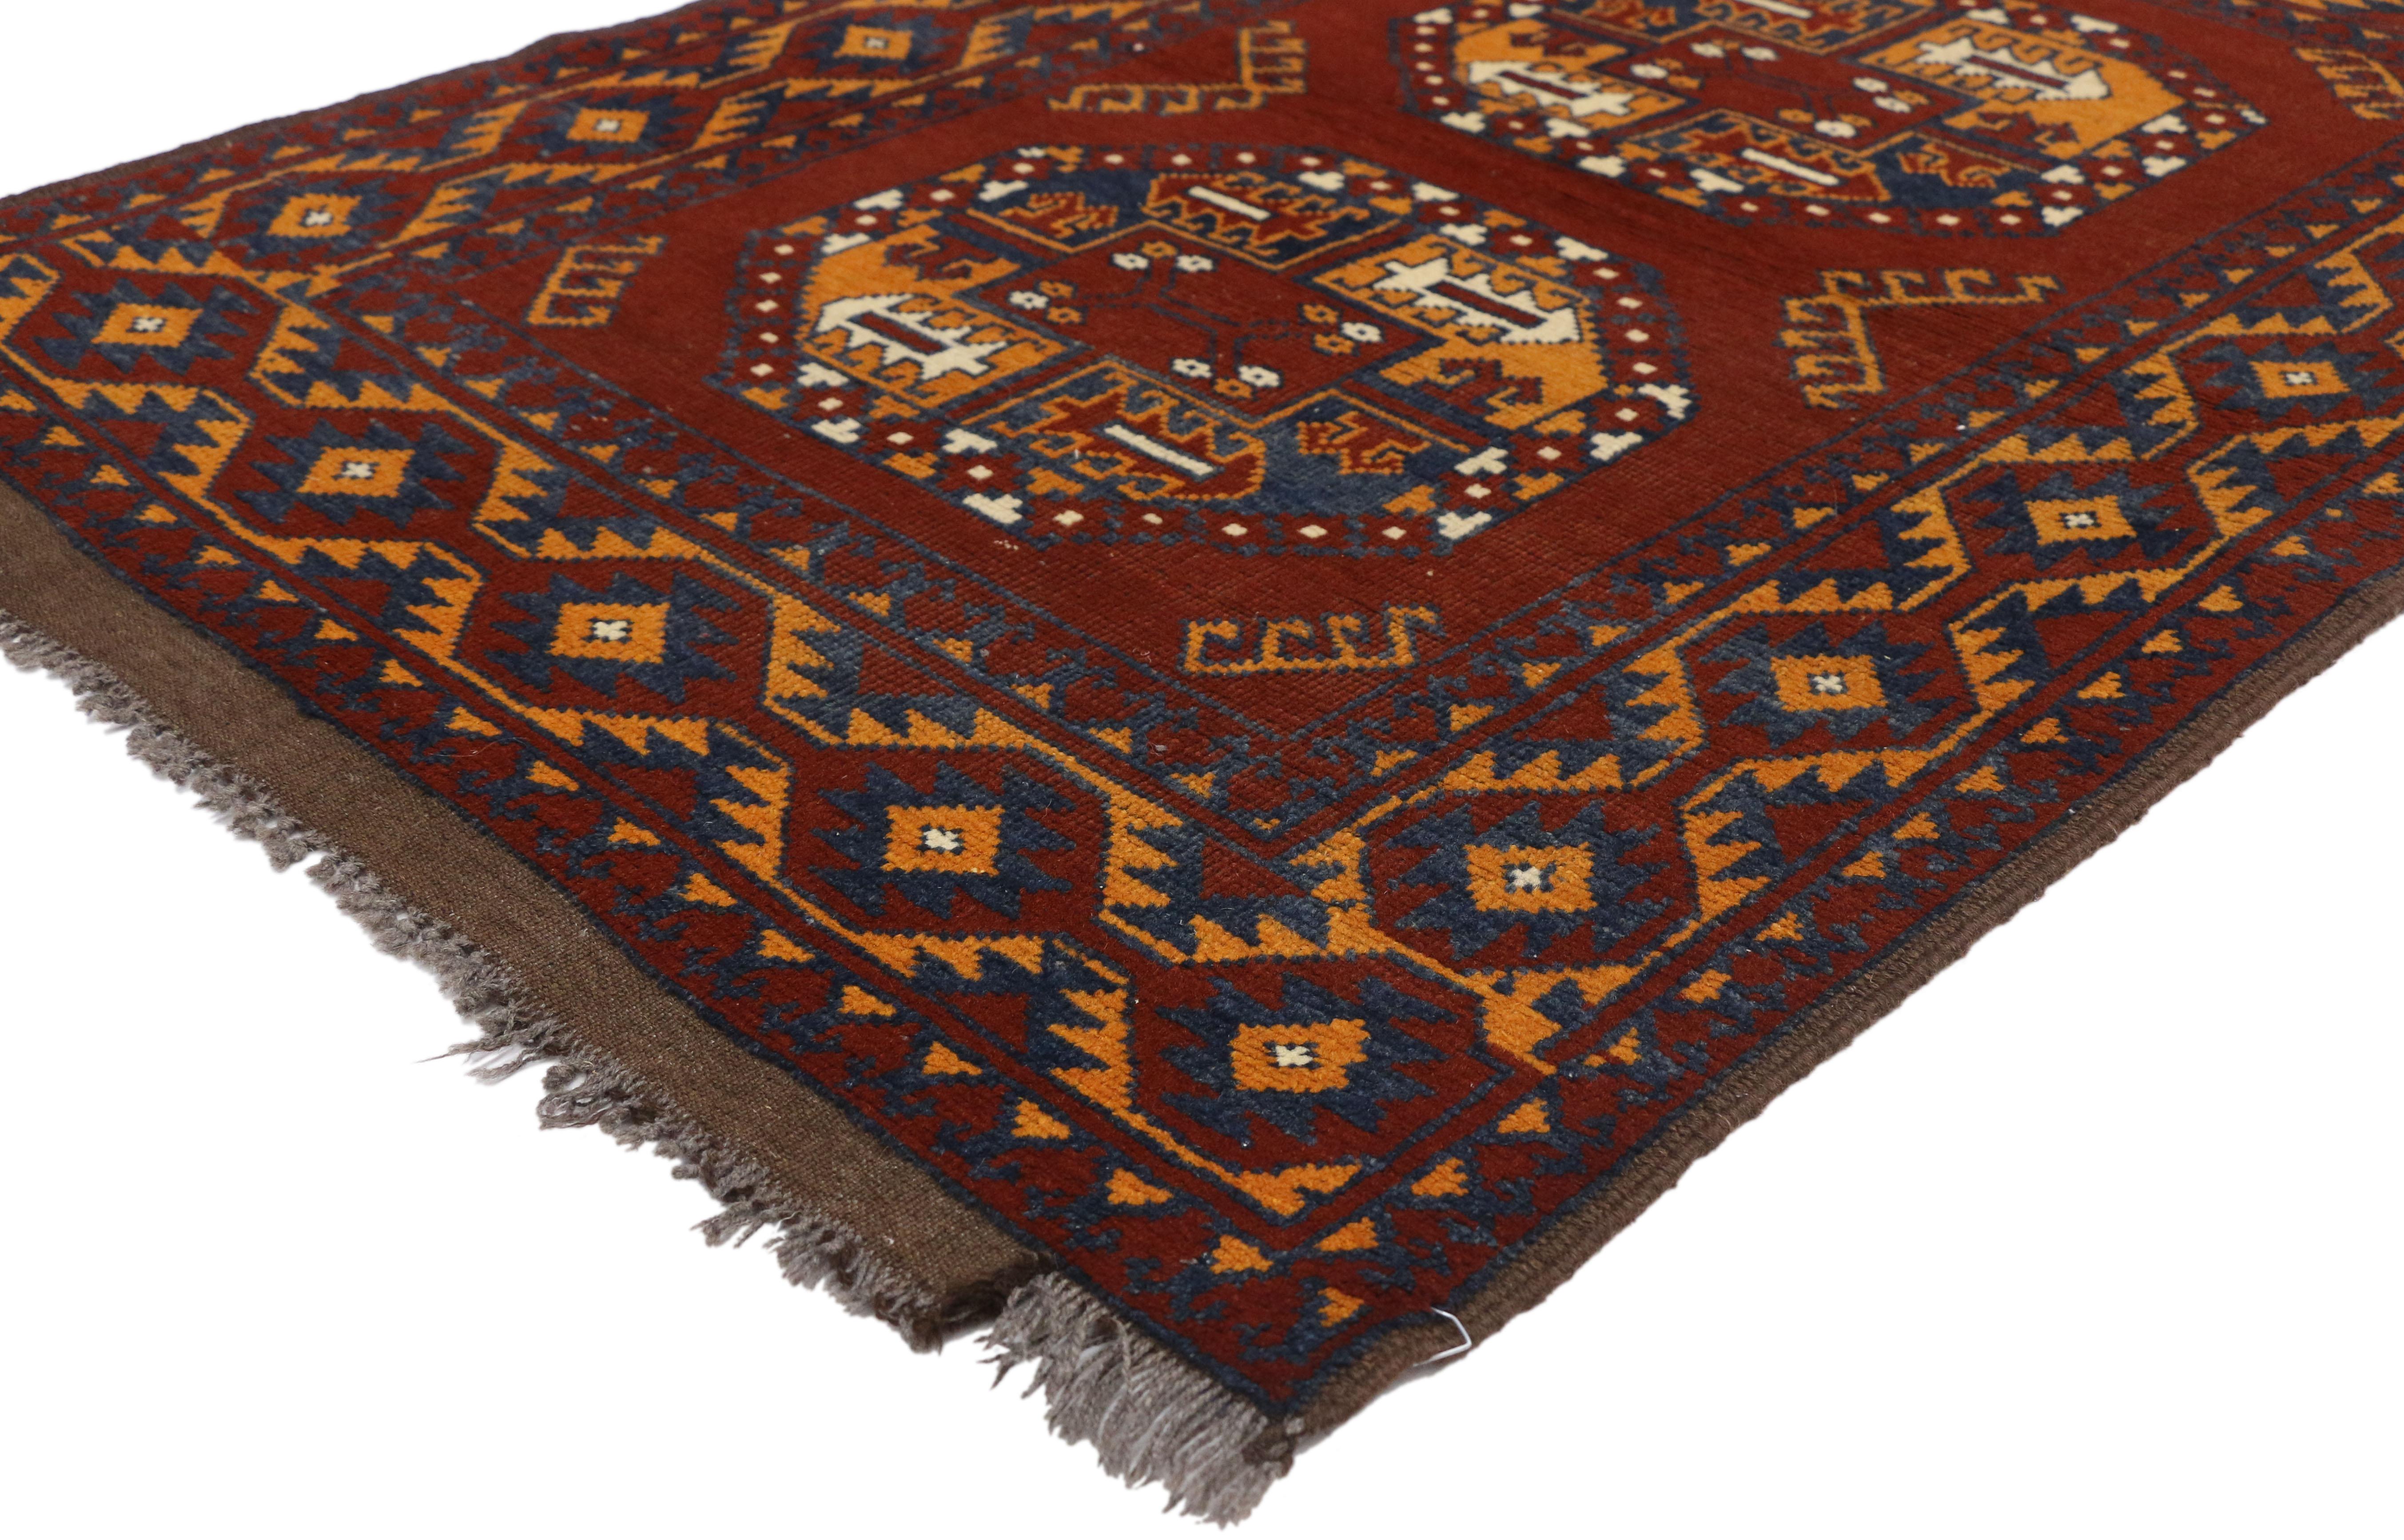 74664 vintage Afghan rug with Mid-Century Modern Vibes and Tribal style. Add a Mid-Century Modern vibe with this hand knotted wool vintage Afghan rug with tribal style. It features two octagonal gul medallions with geometric motifs. It is enclosed